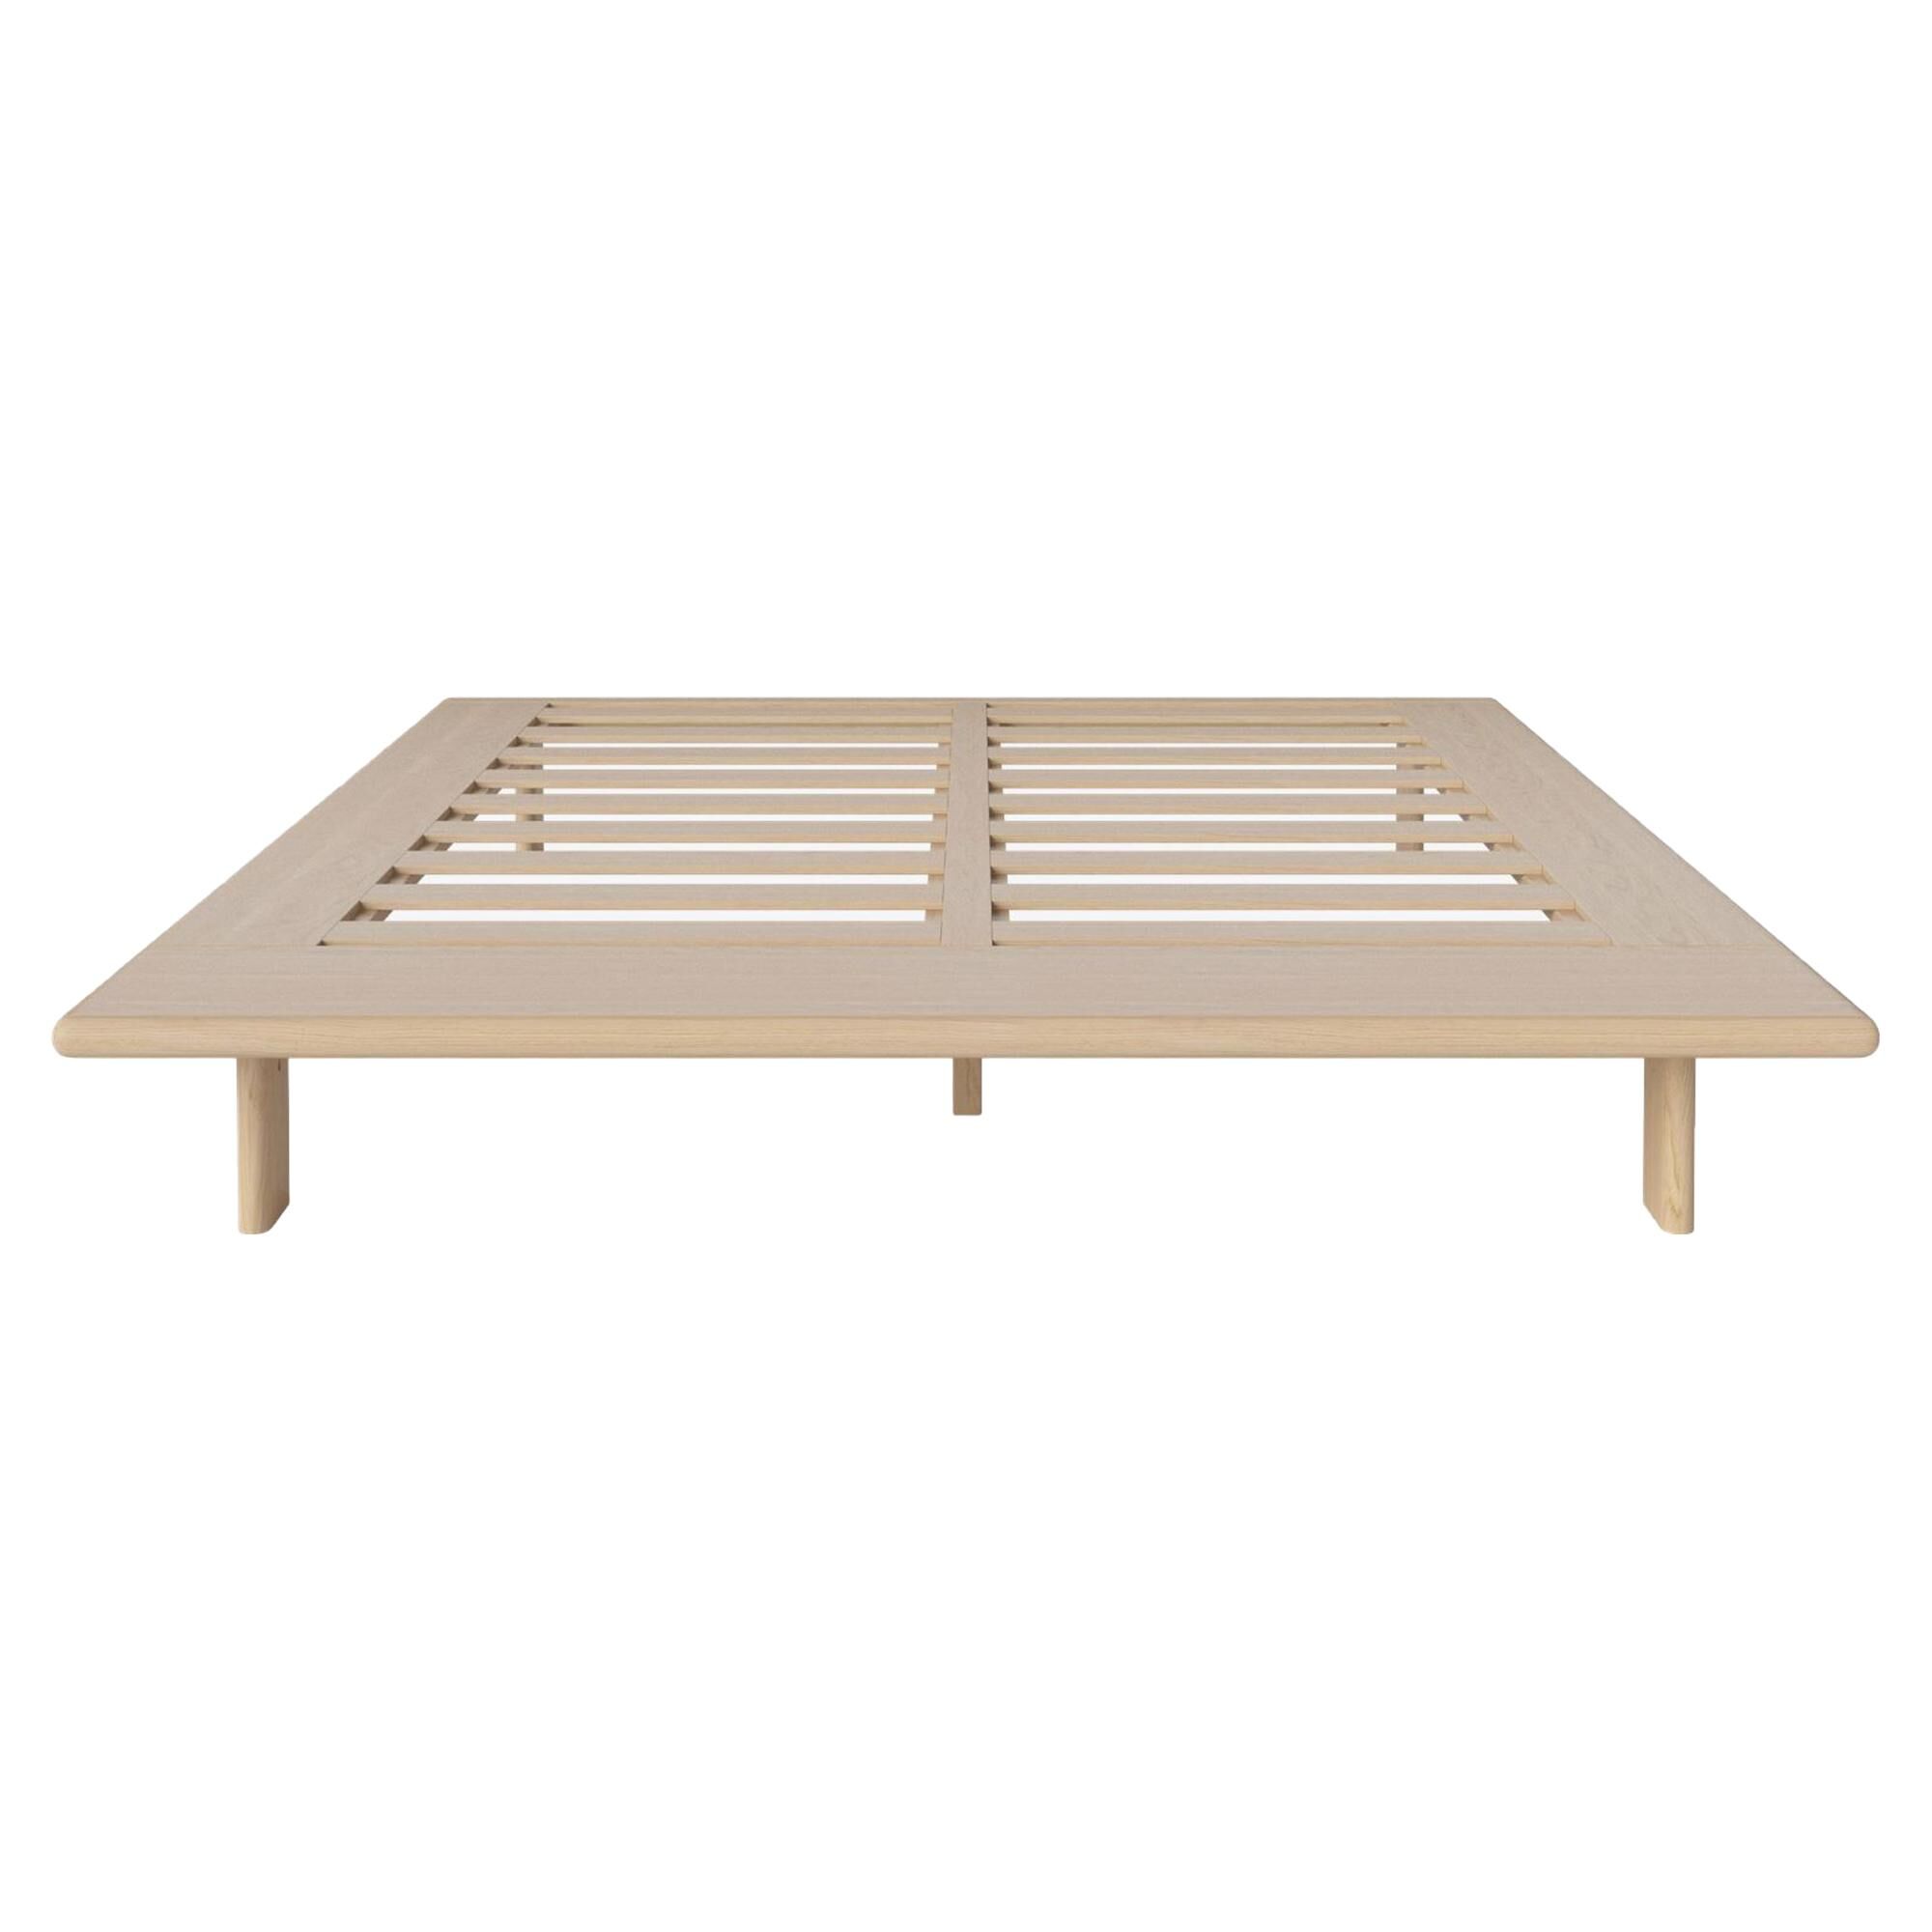 Bolia Haven bed 166x230 wit geolied eiken